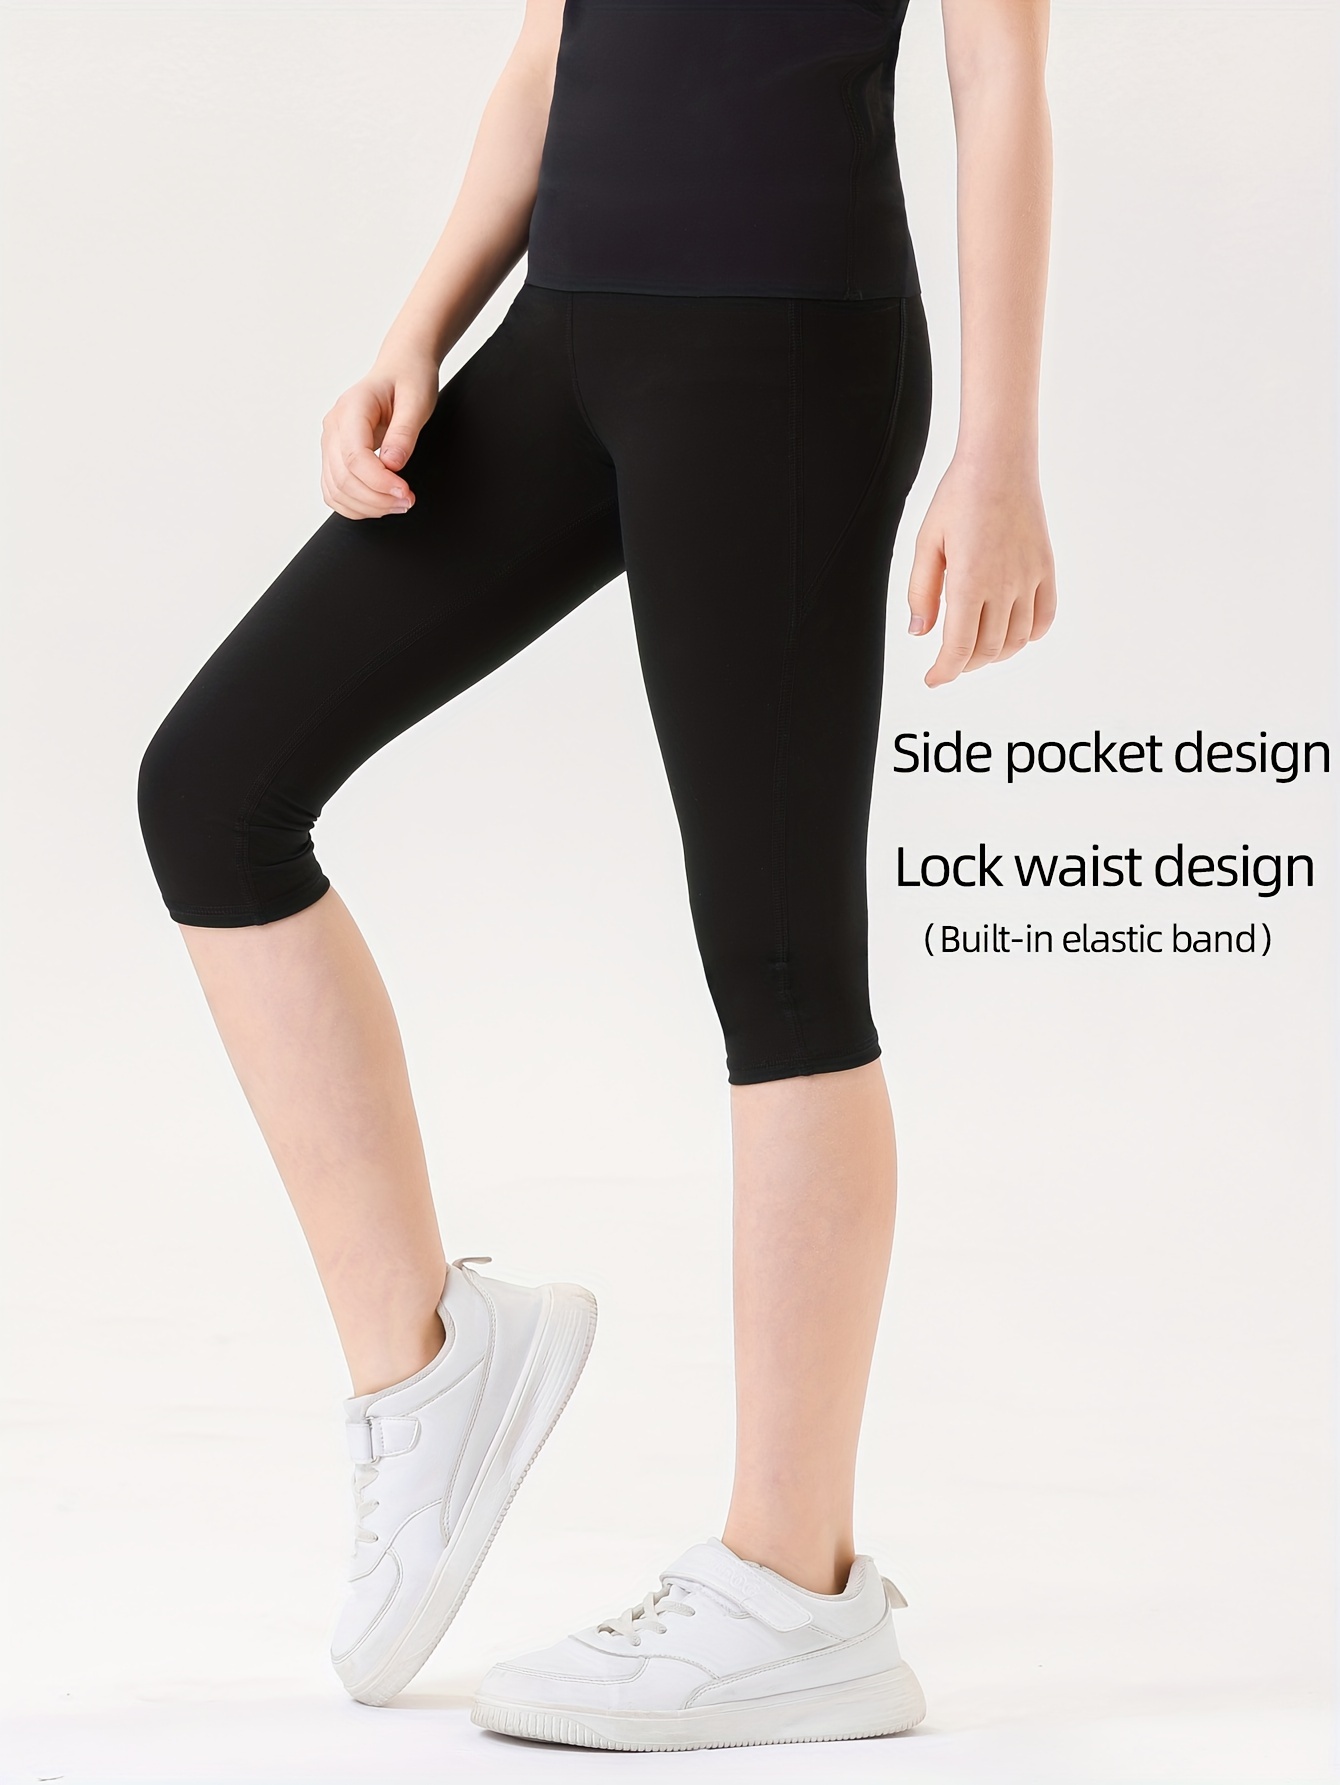 Women's Loose Sports Pants for Running, Training, Yoga, Quick-Drying  Fitness Leggings with Pockets